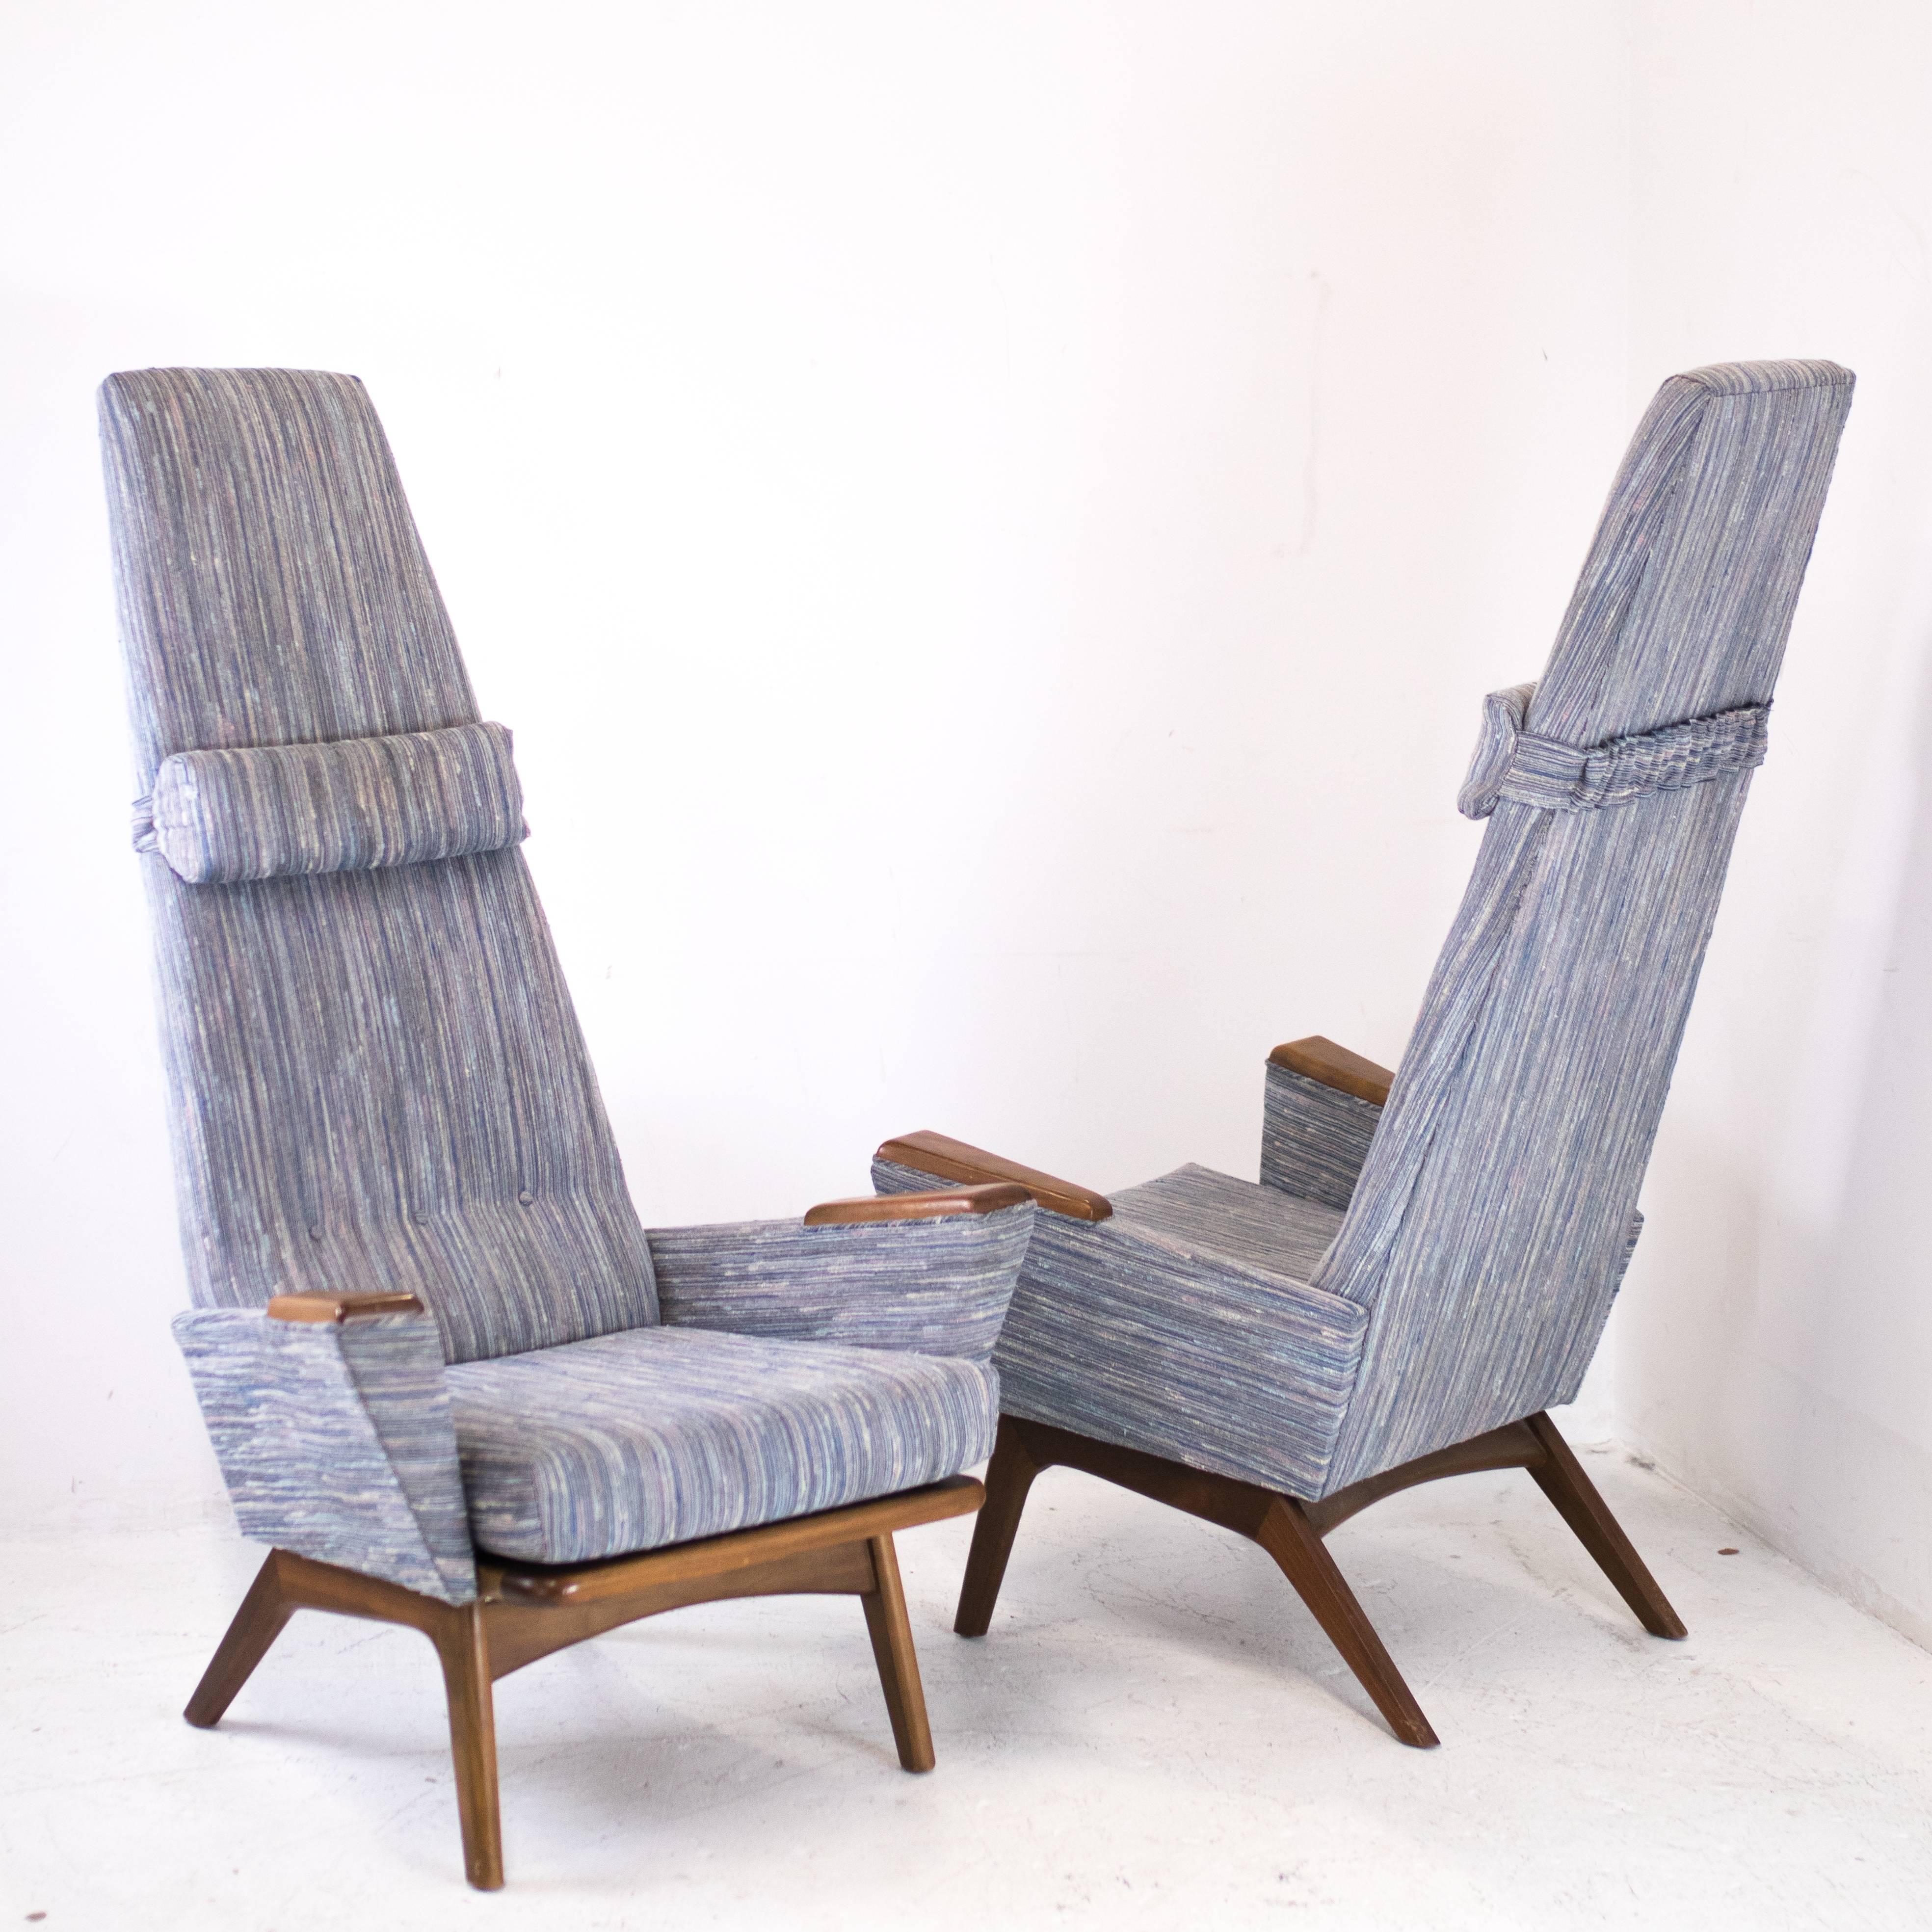 Pair of 1865-C slim Jim lounge chairs by Adrian Pearsall for Craft Associates. Chairs are in good found condition with wear from age and use. Upholstery and refinishing is recommended. 

dimensions: 32